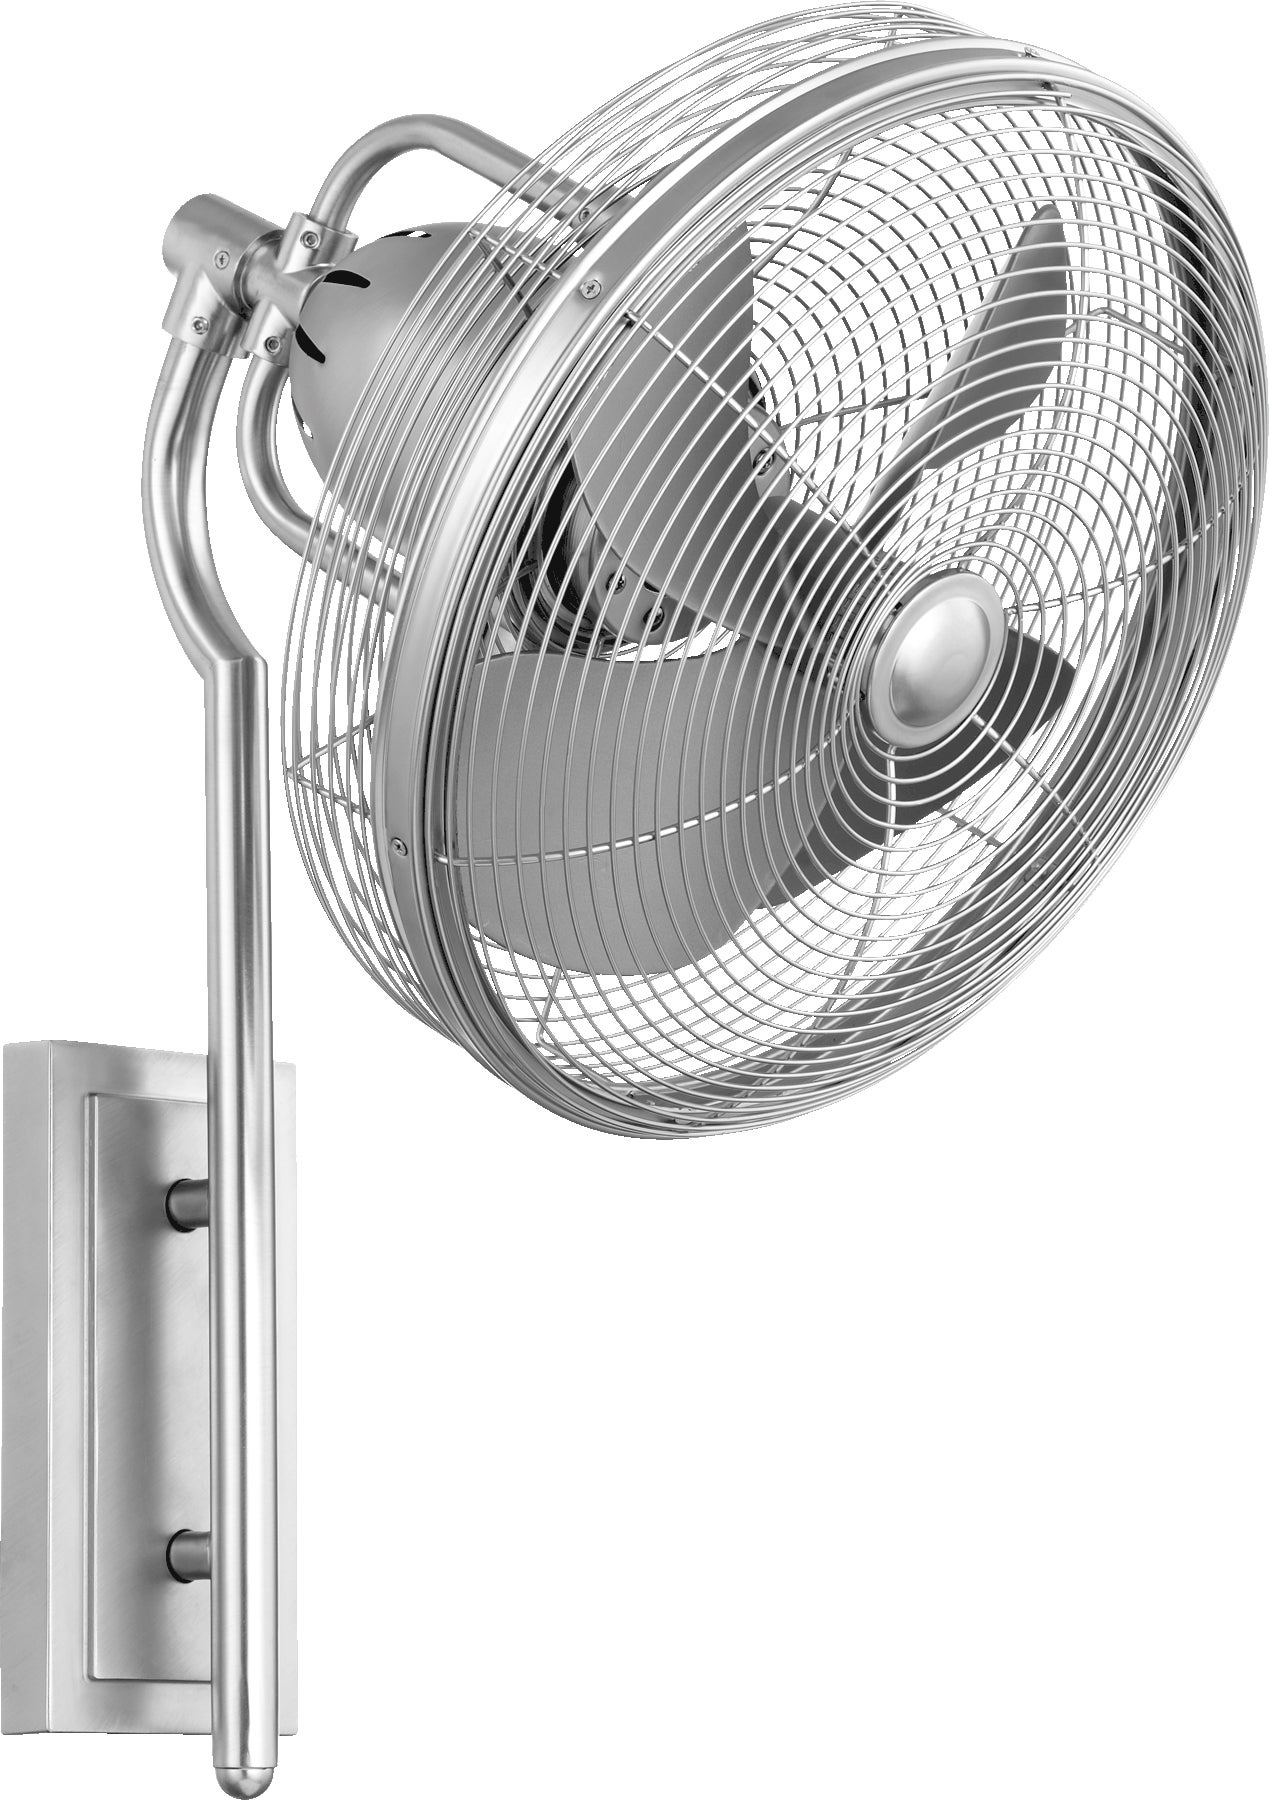 13 Wall Mounted Fan with Folding Arm